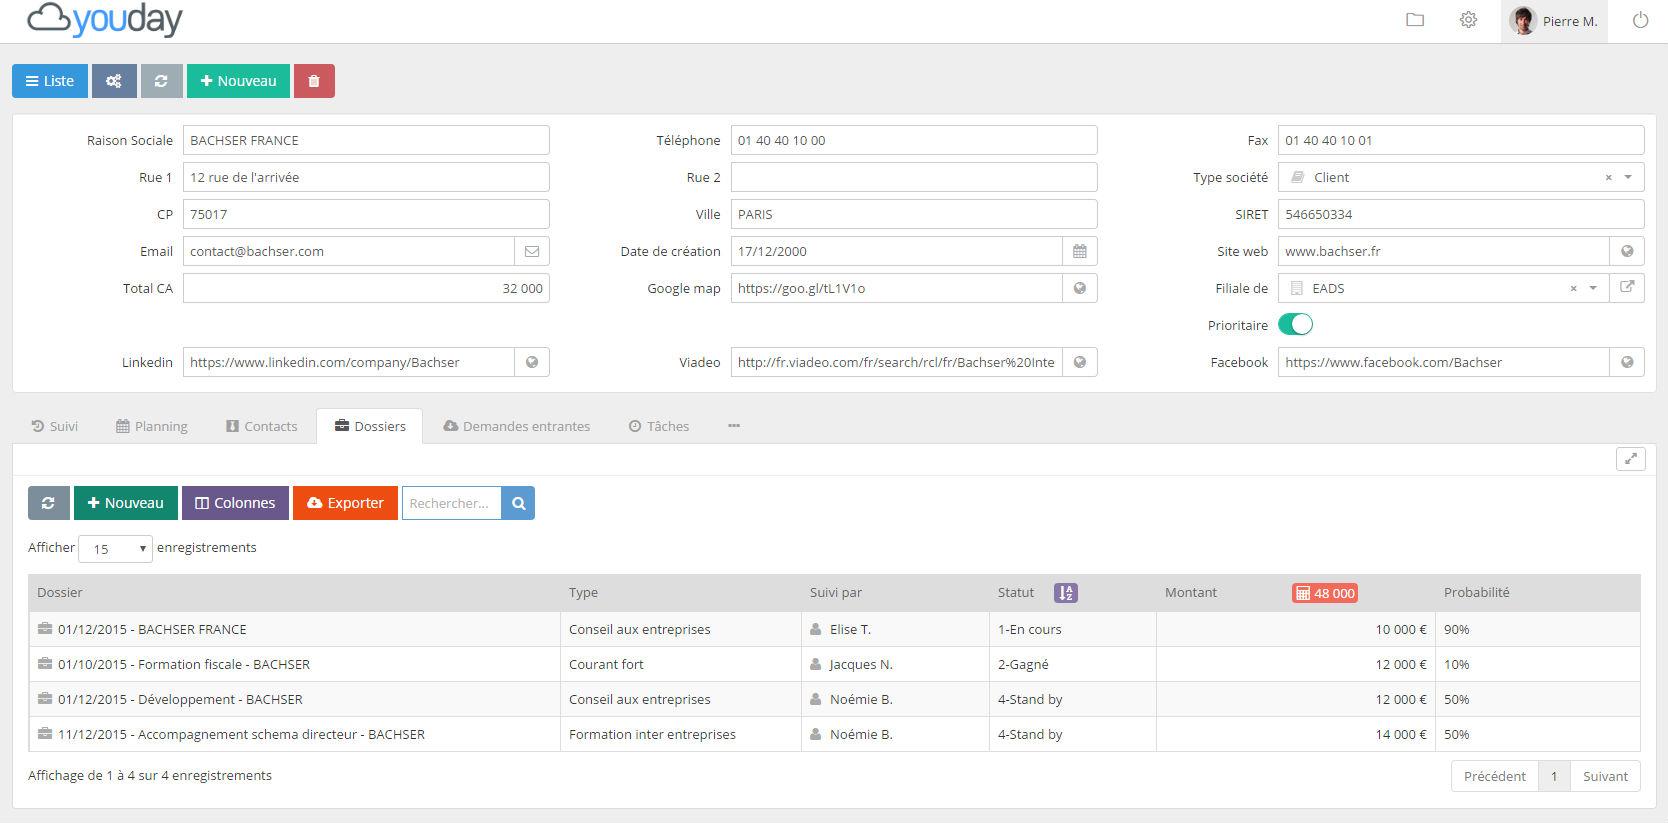 Youday CRM - Account Management CRM Youday